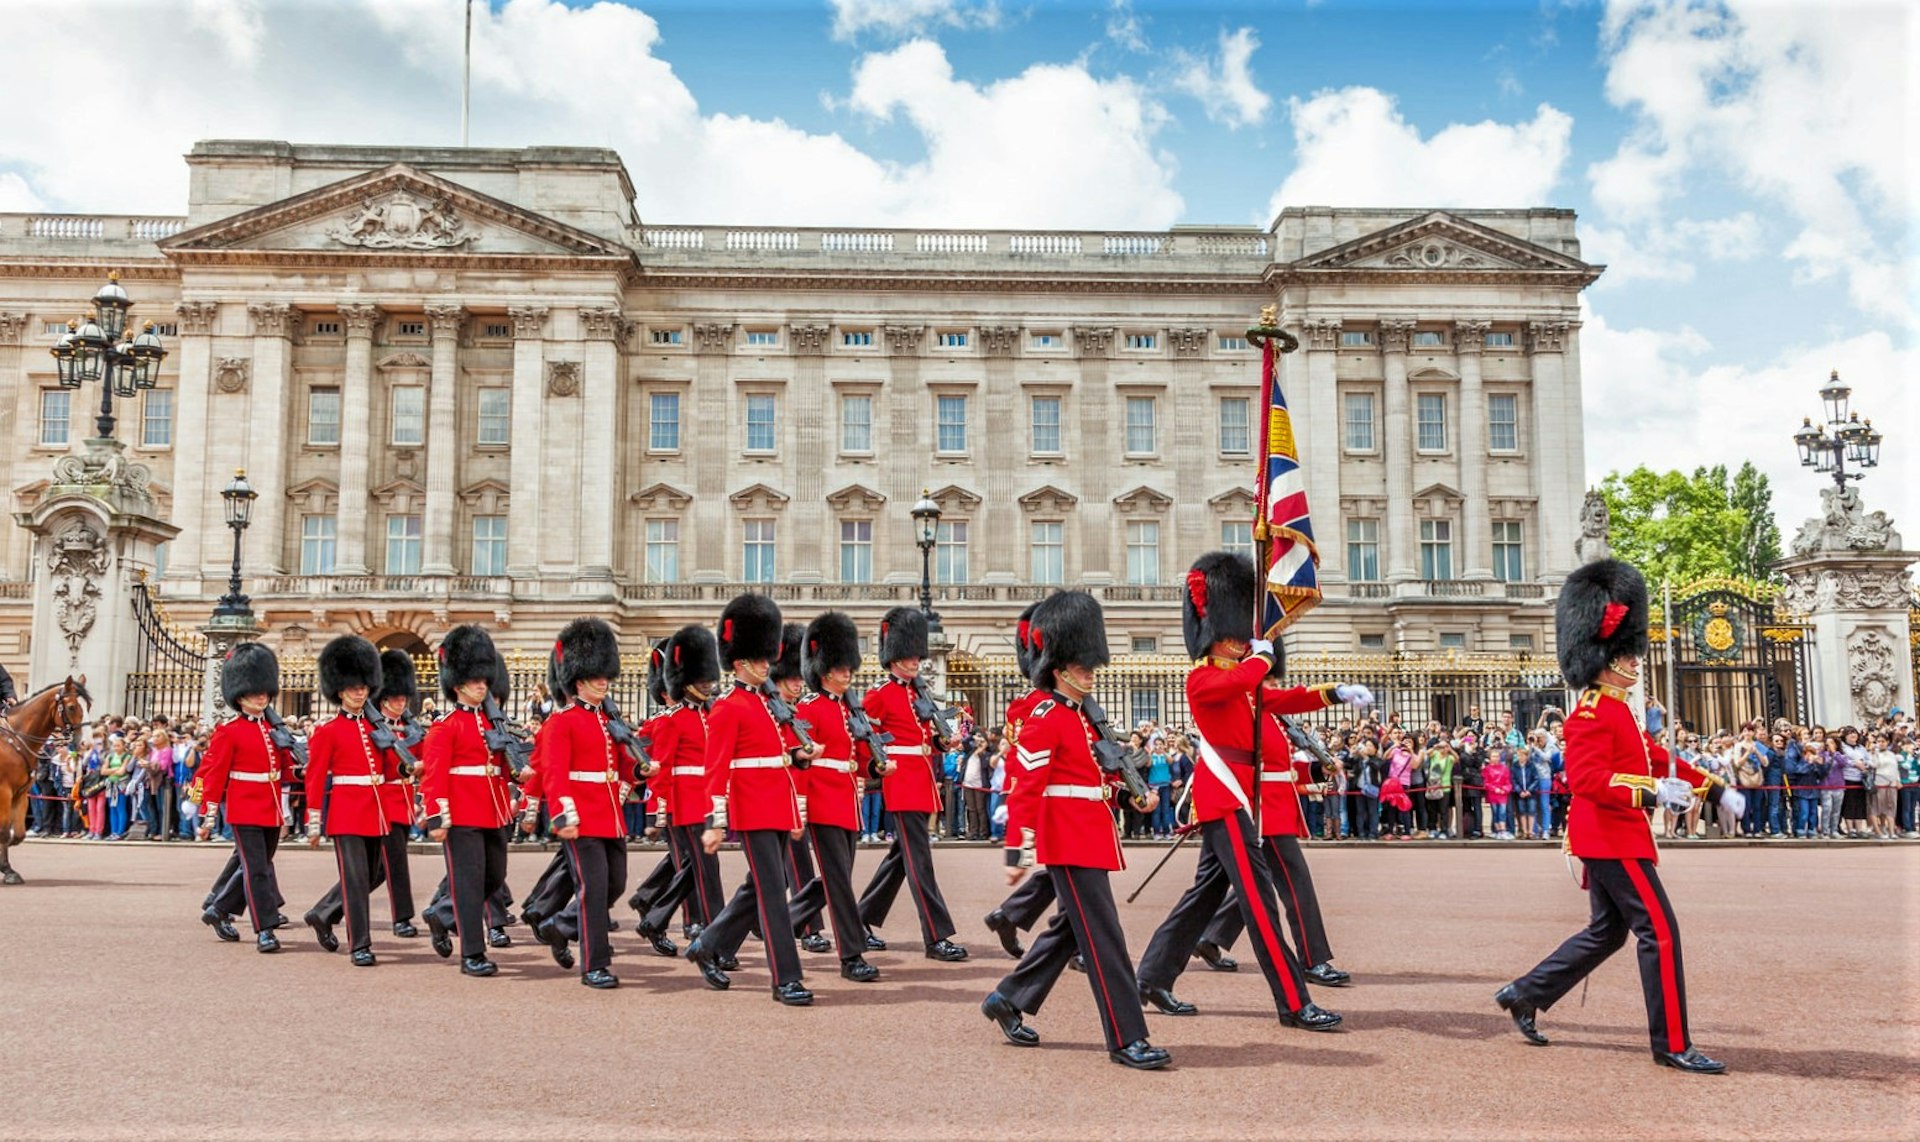 The facade of Buckingham Palace with soldiers marching past.